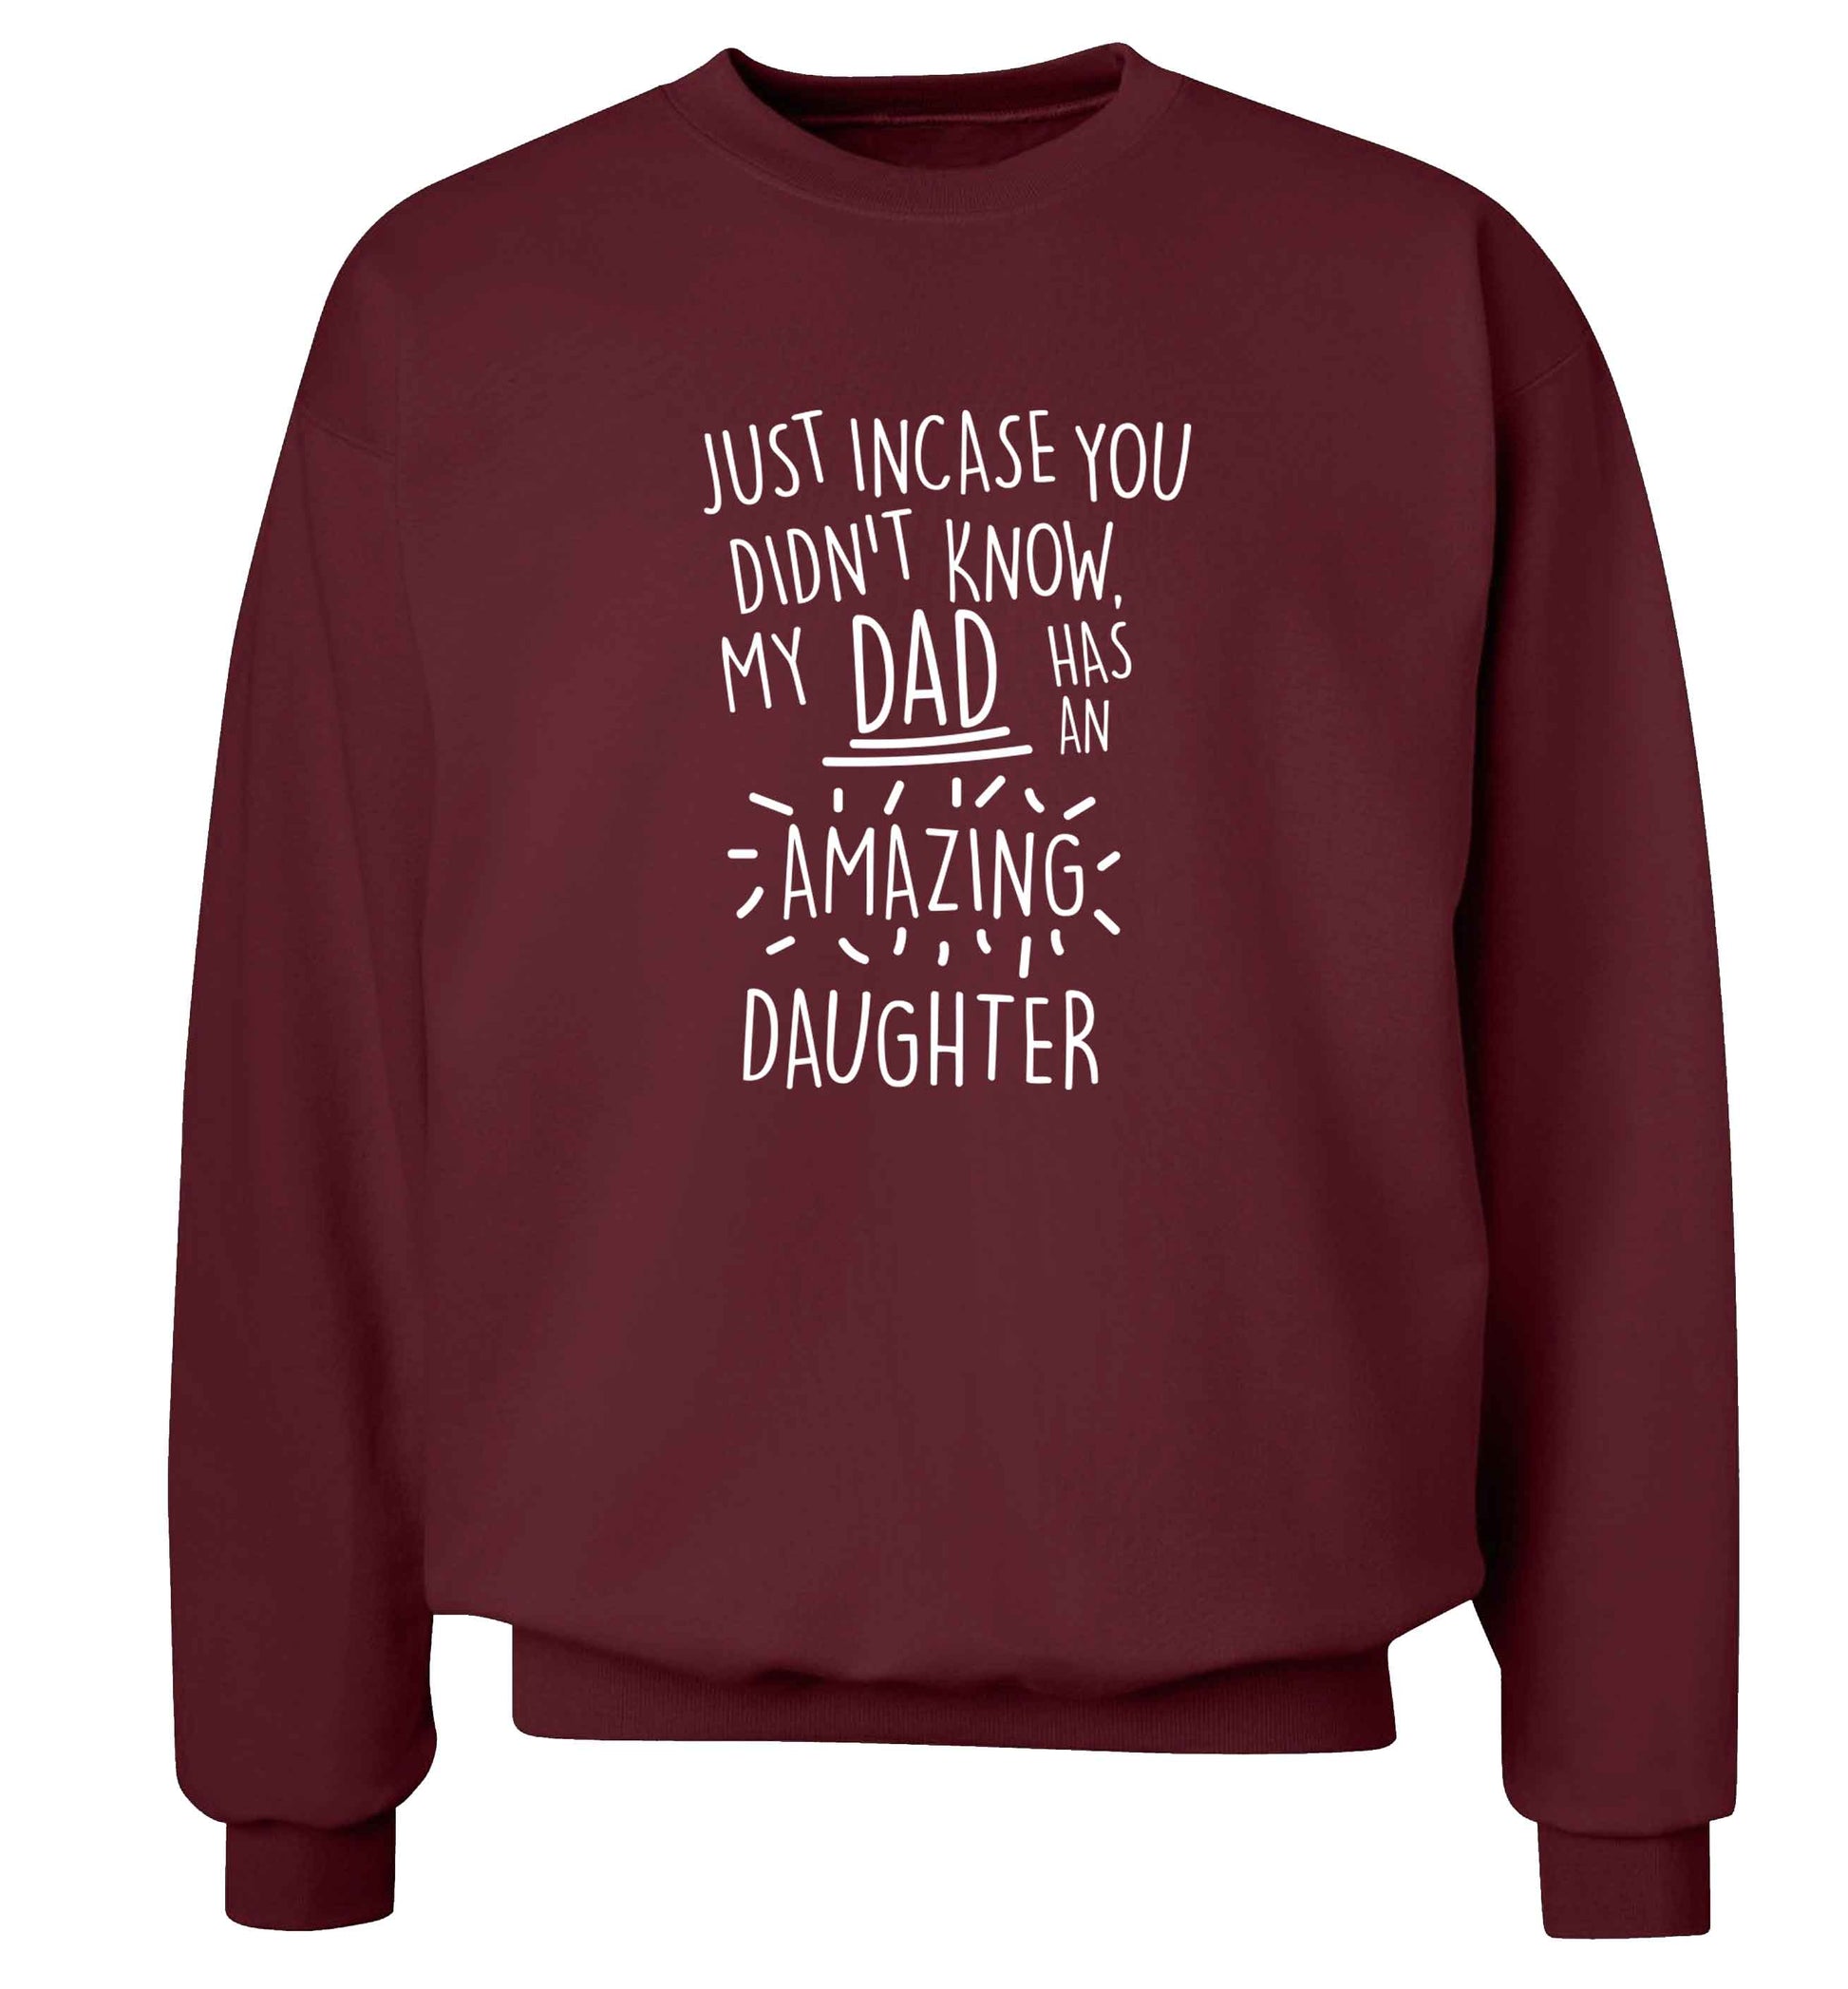 Just incase you didn't know my dad has an amazing daughter adult's unisex maroon sweater 2XL